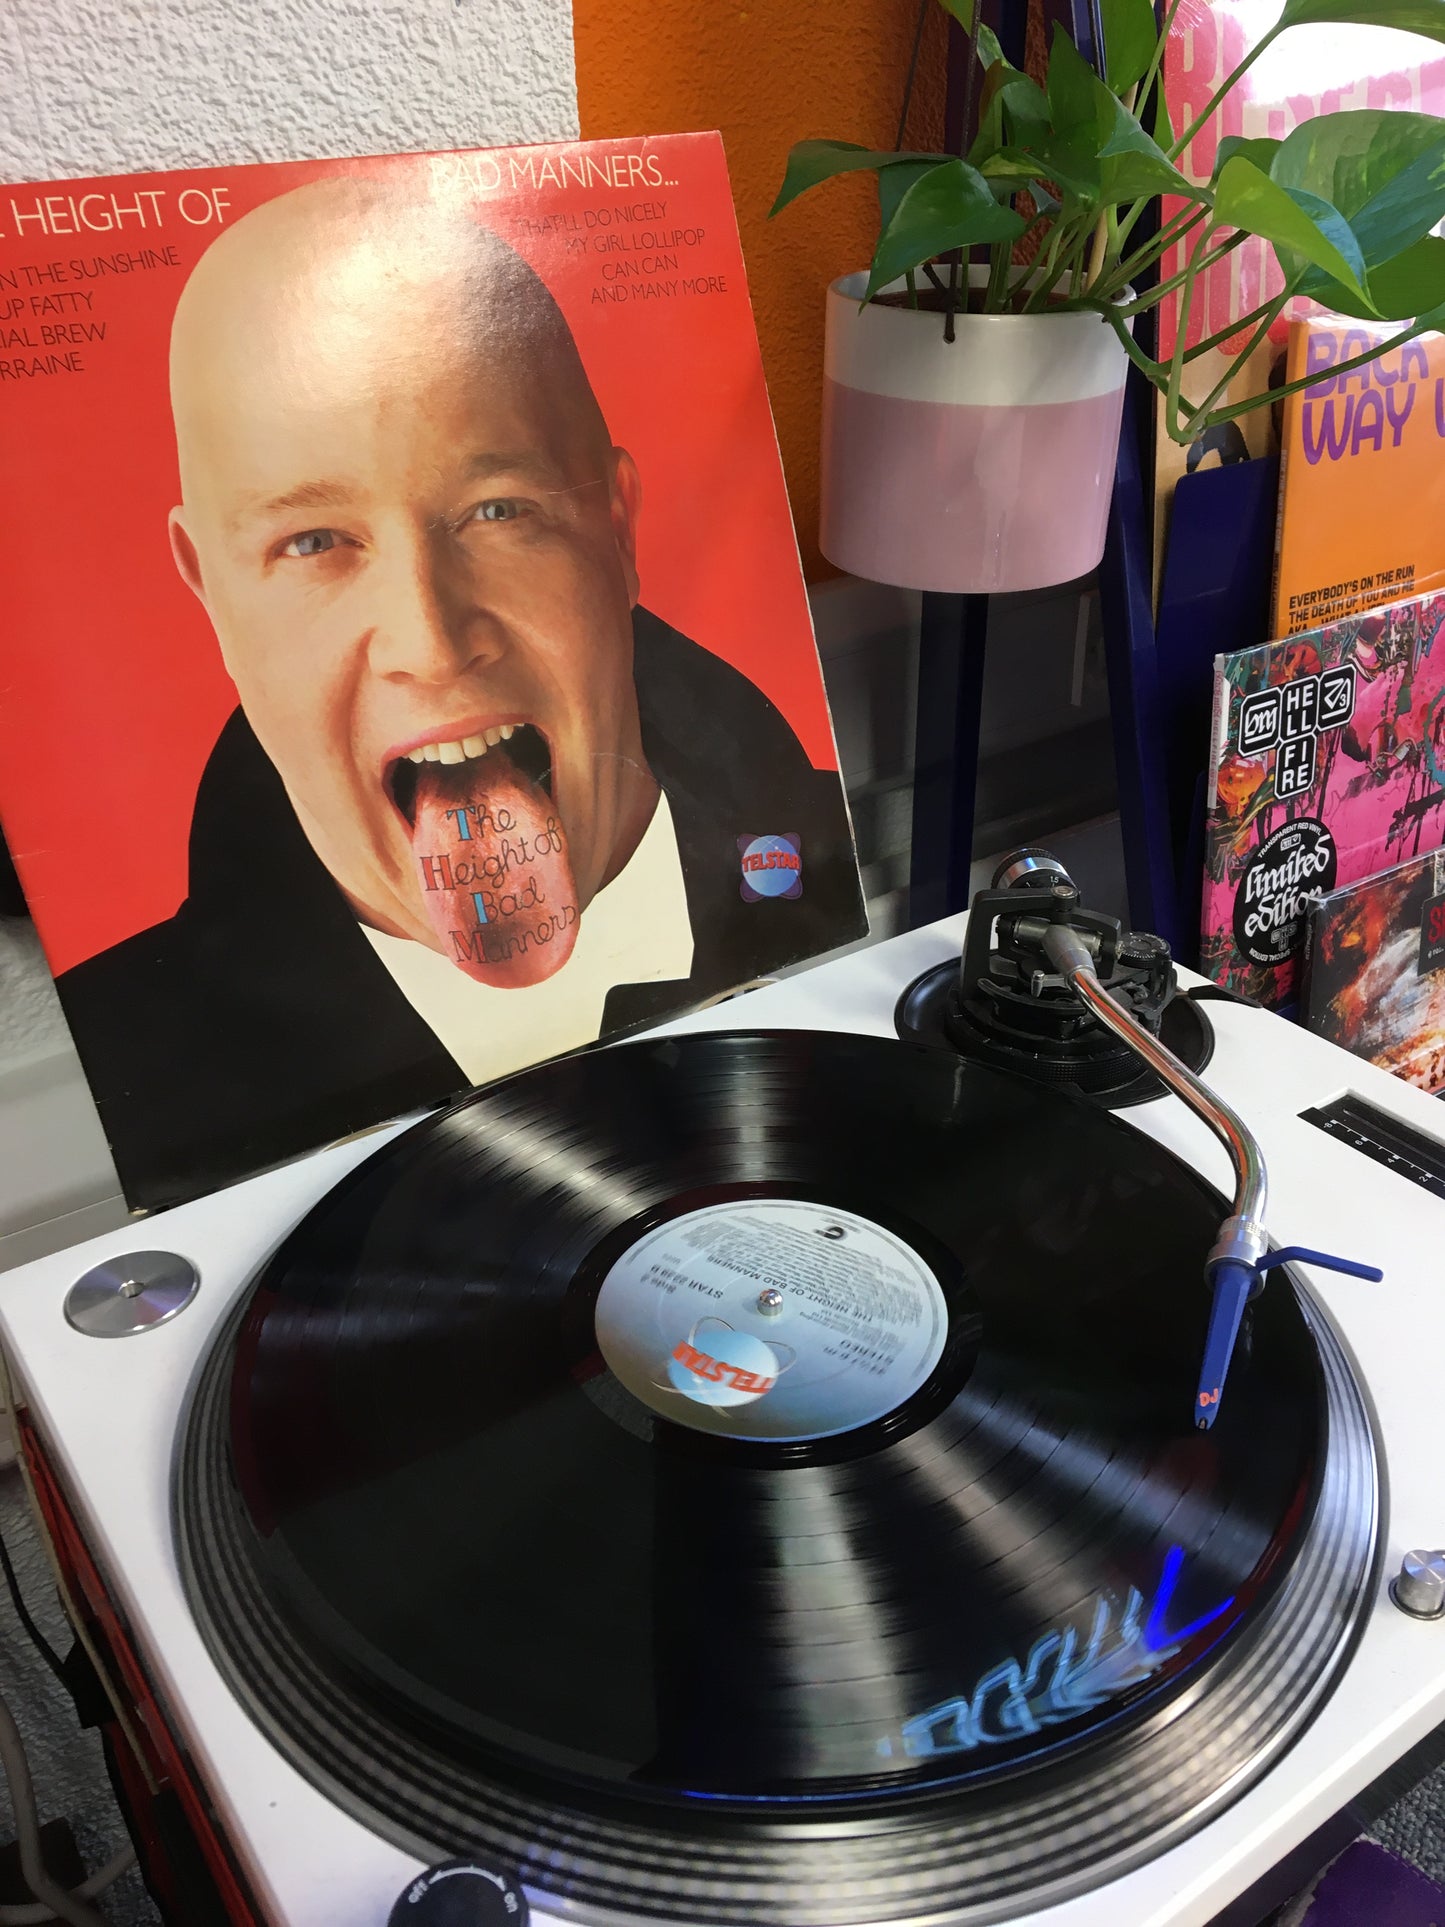 BAD MANNERS: THE HEIGHT OF BAD MANNERS 1LP VINYL RECORD (1983)